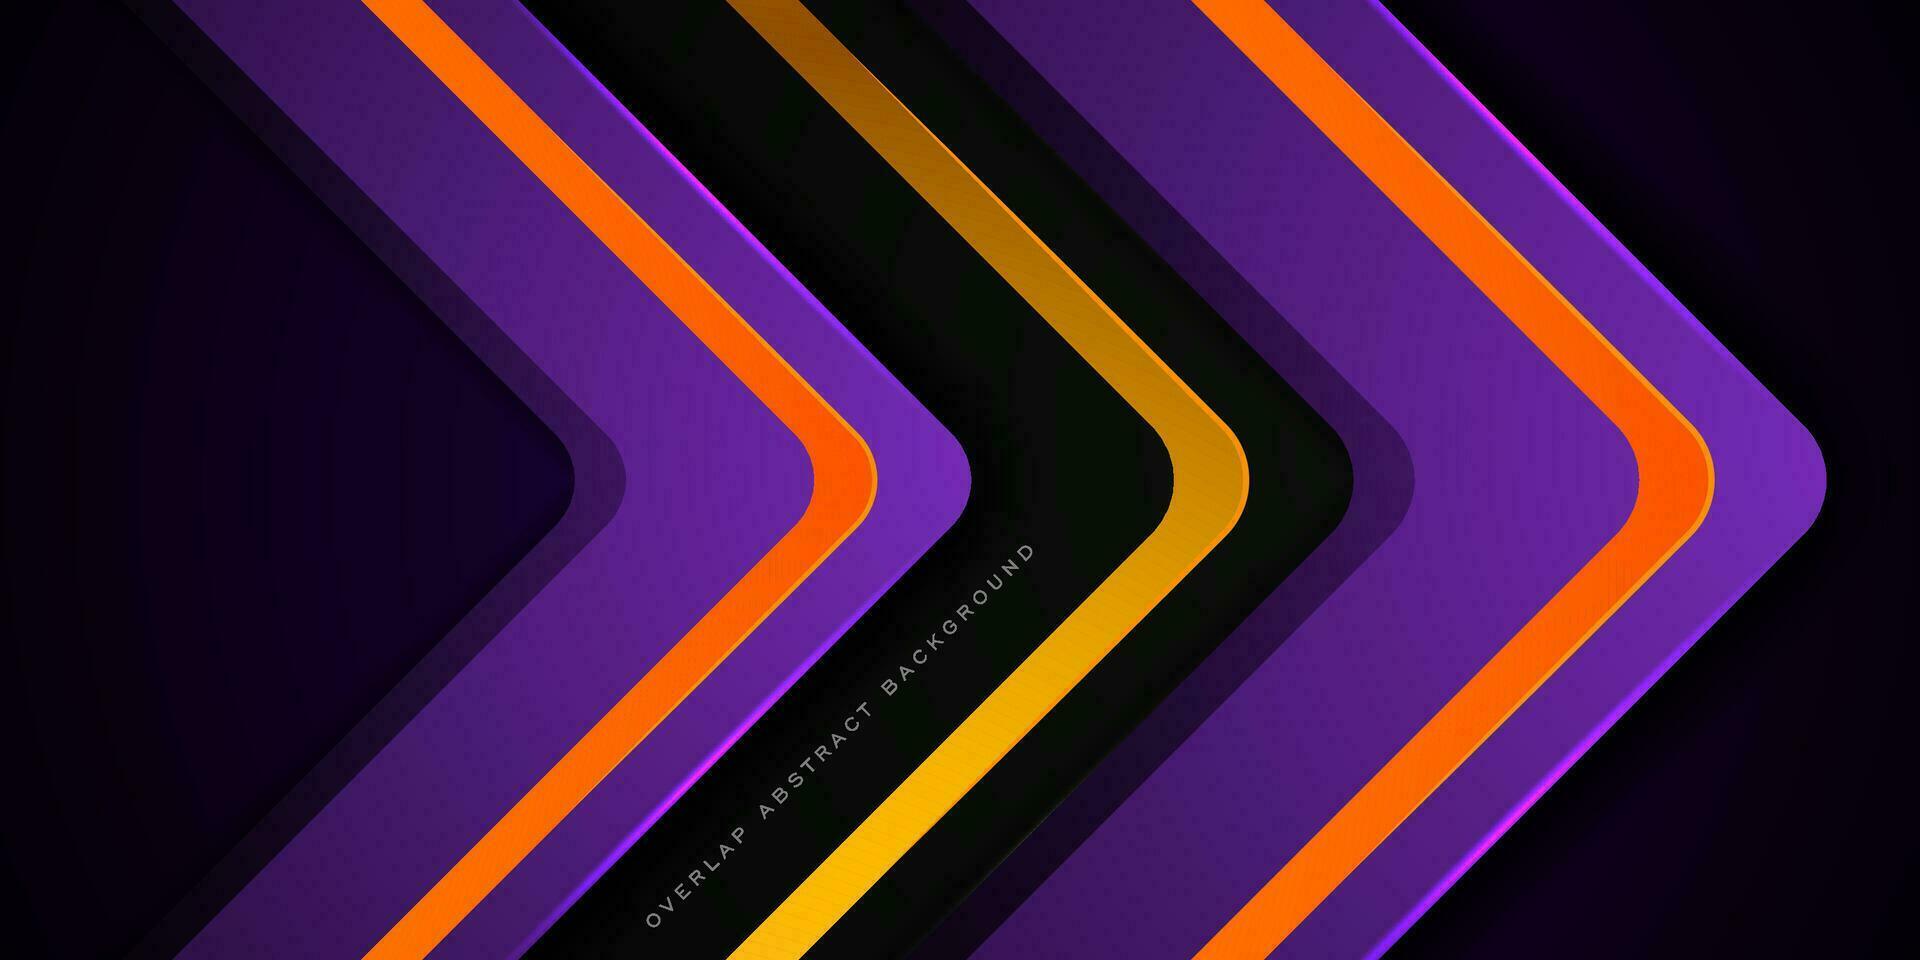 Abstract square theme arrows overlap background with purple and black shapes with orang and gold lines pattern for graphics design .Eps10 vector